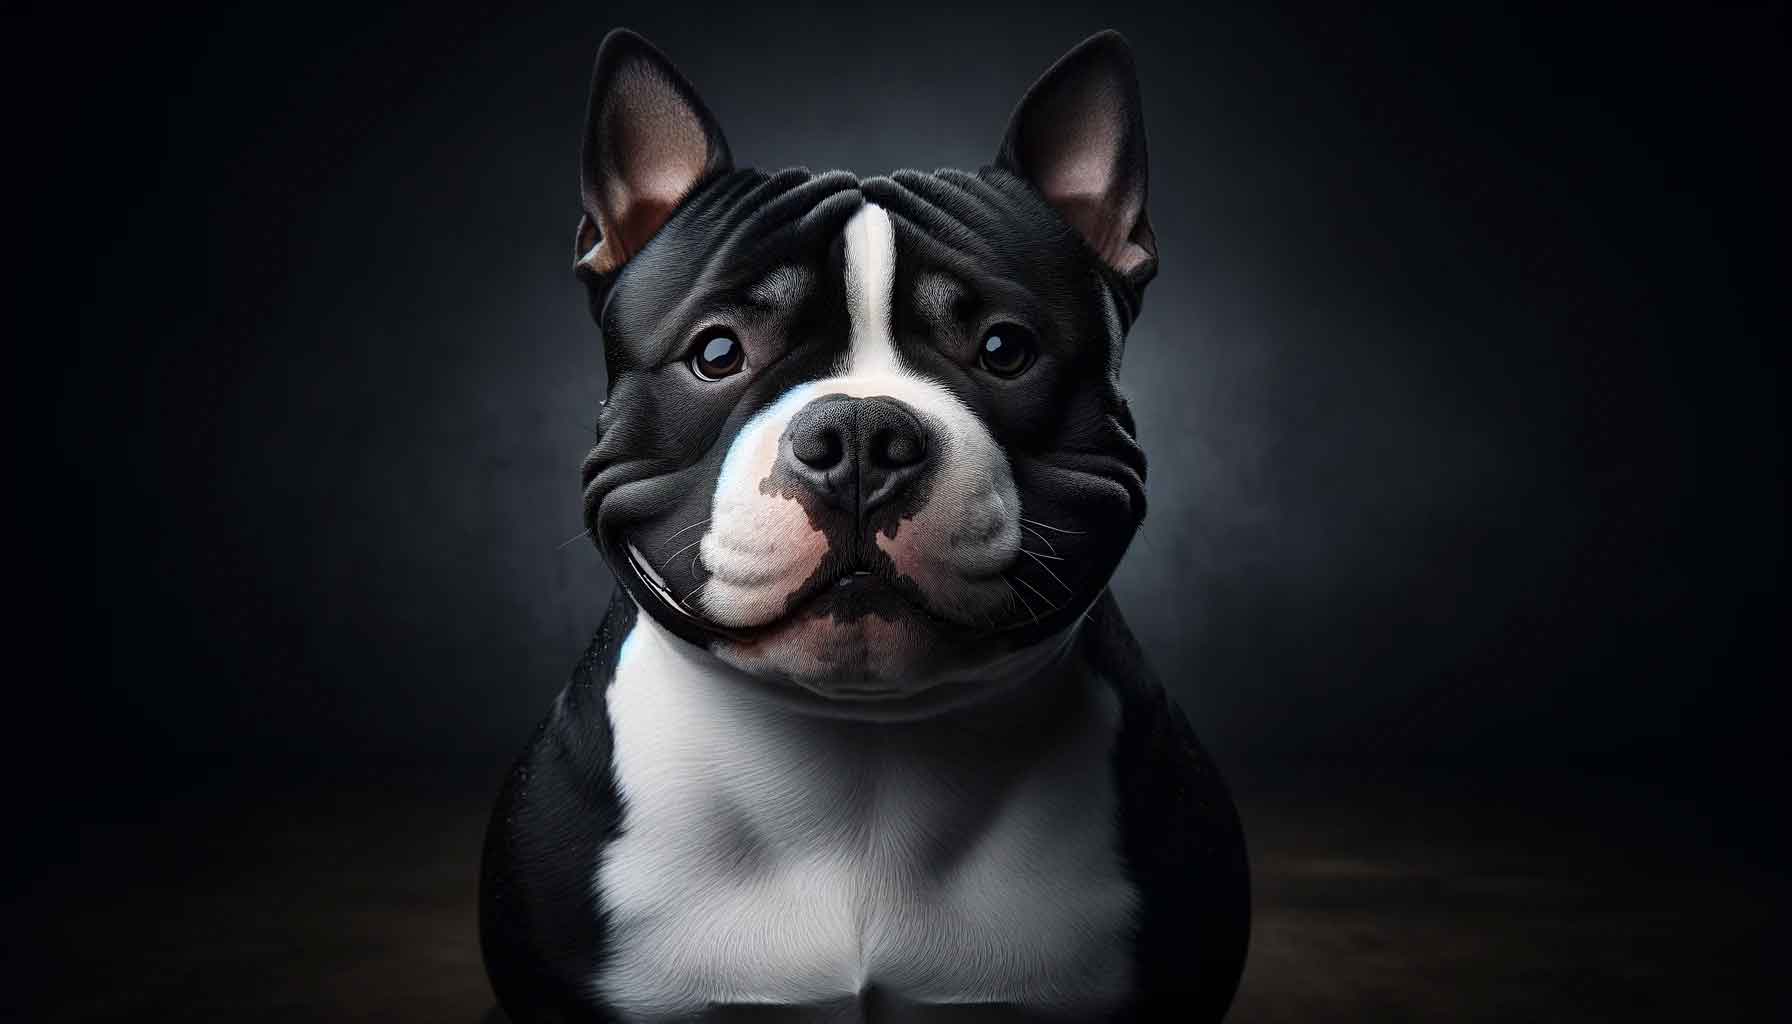 A black and white Micro Bully with a prominent white chest spot, captured in a studio setting with a dark background highlighting its features.